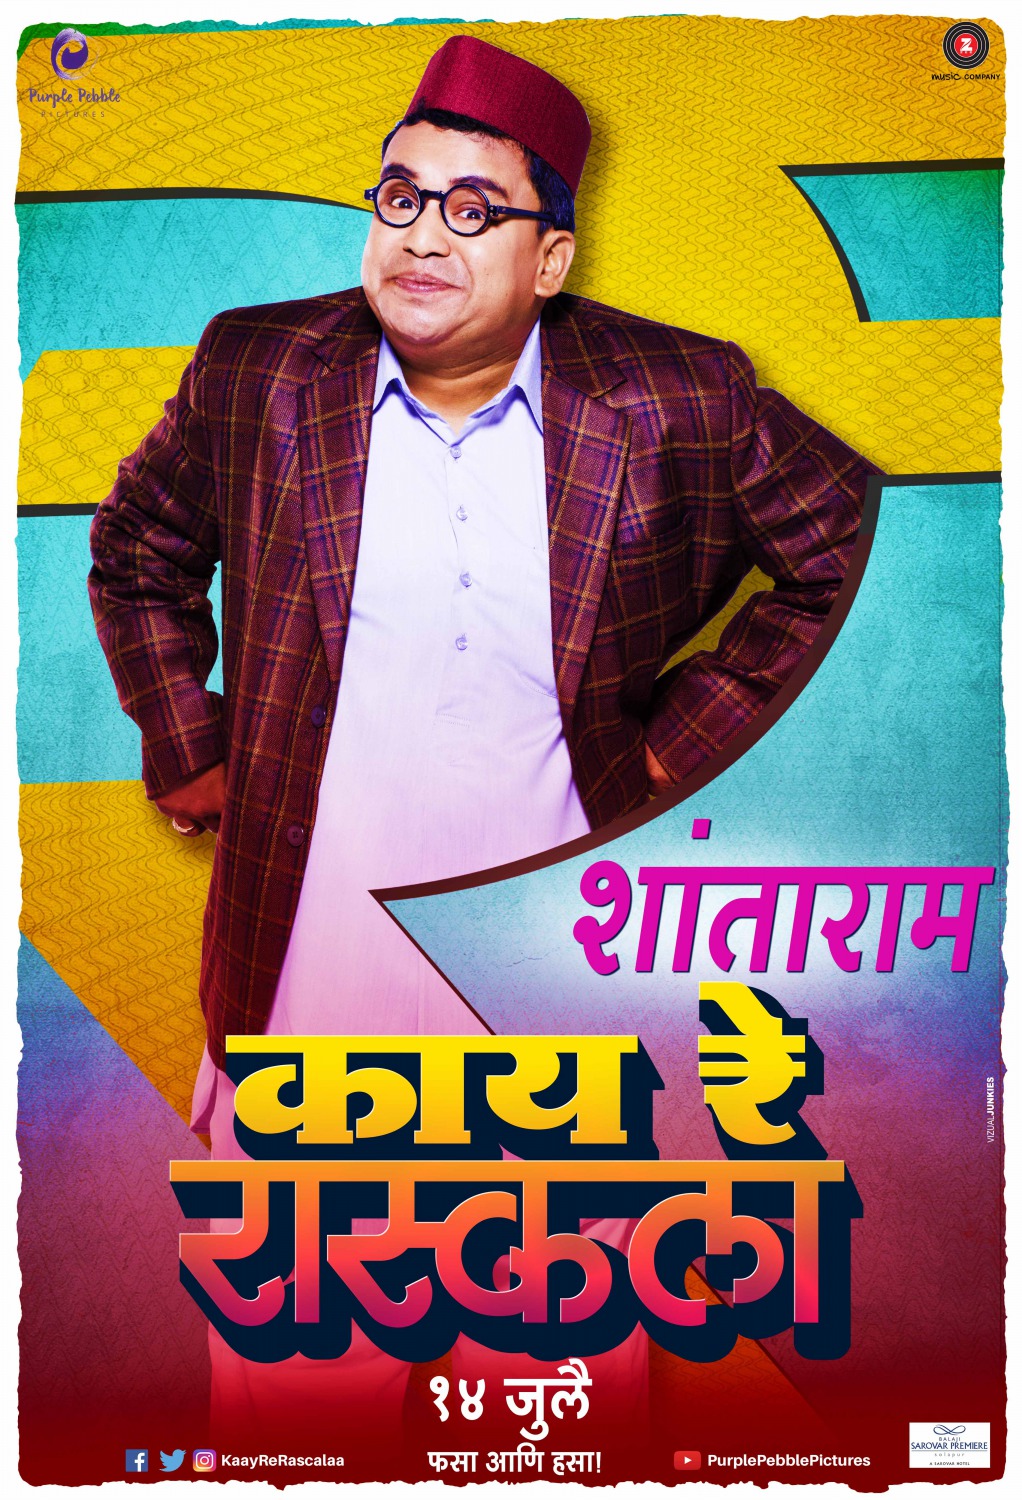 Extra Large Movie Poster Image for Kaay Re Rascalaa (#6 of 13)